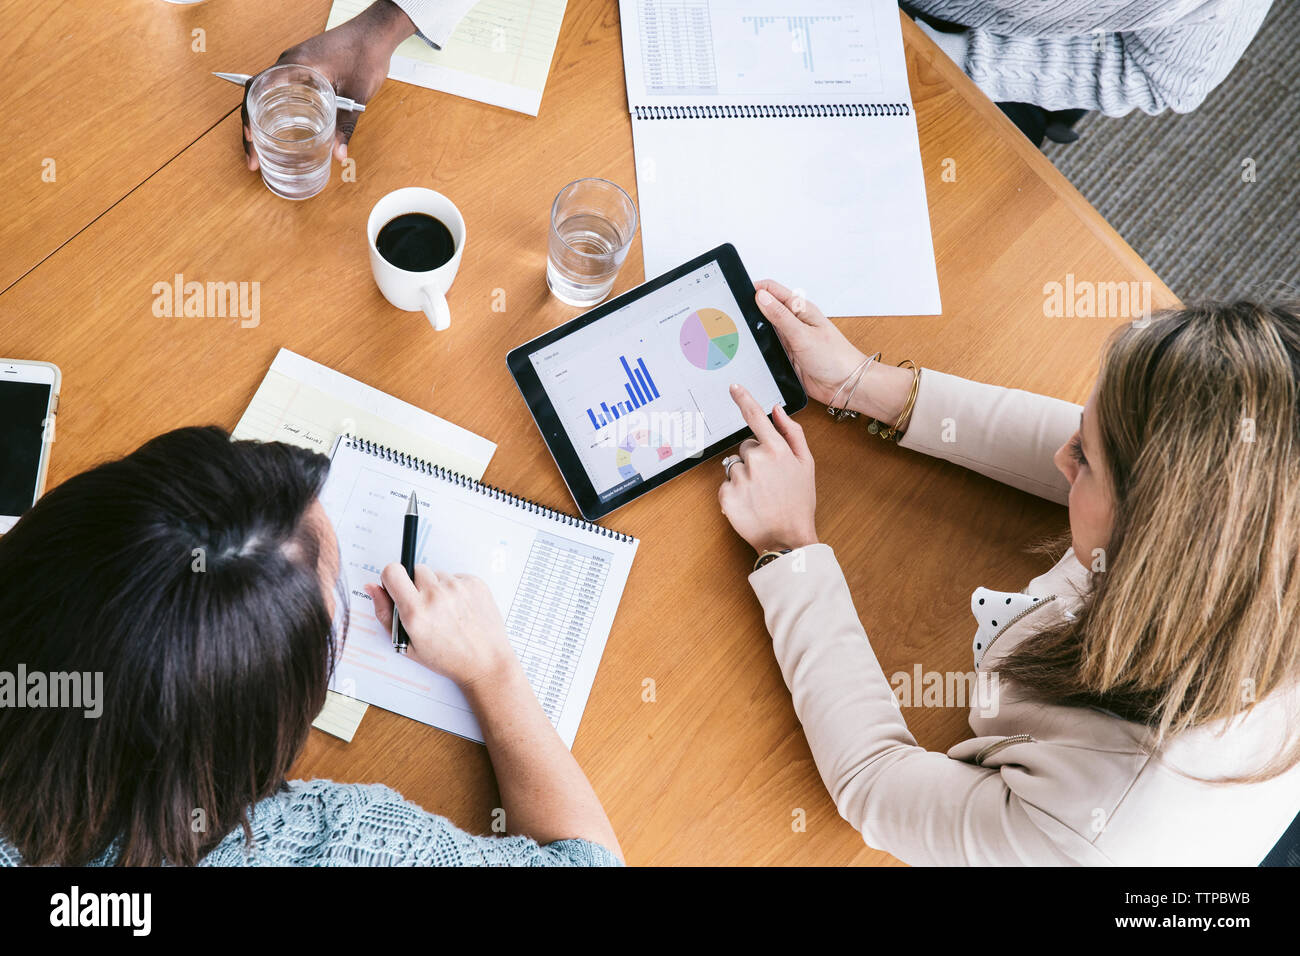 High angle view of businesswoman analyzing data with colleagues in meeting Stock Photo